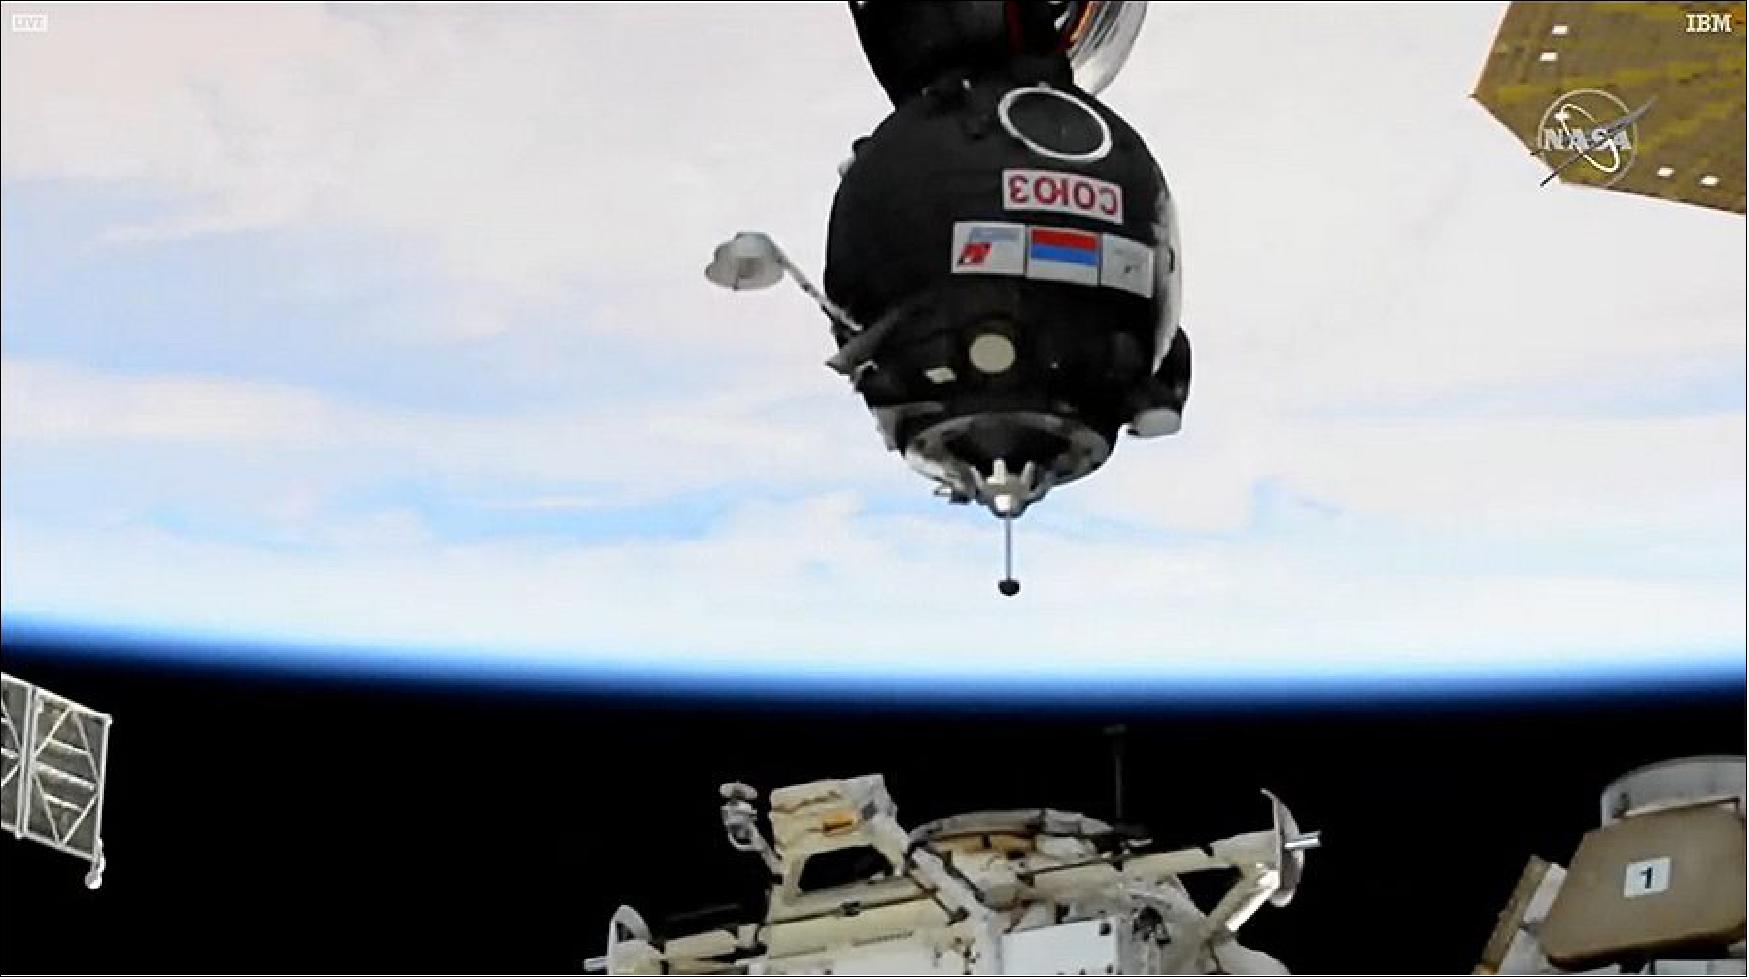 Figure 35: The Soyuz MS-17 crew ship with the Expedition 64 crew inside is pictured just a few meters away from the Rassvet module’s docking port (image credit: NASA TV)